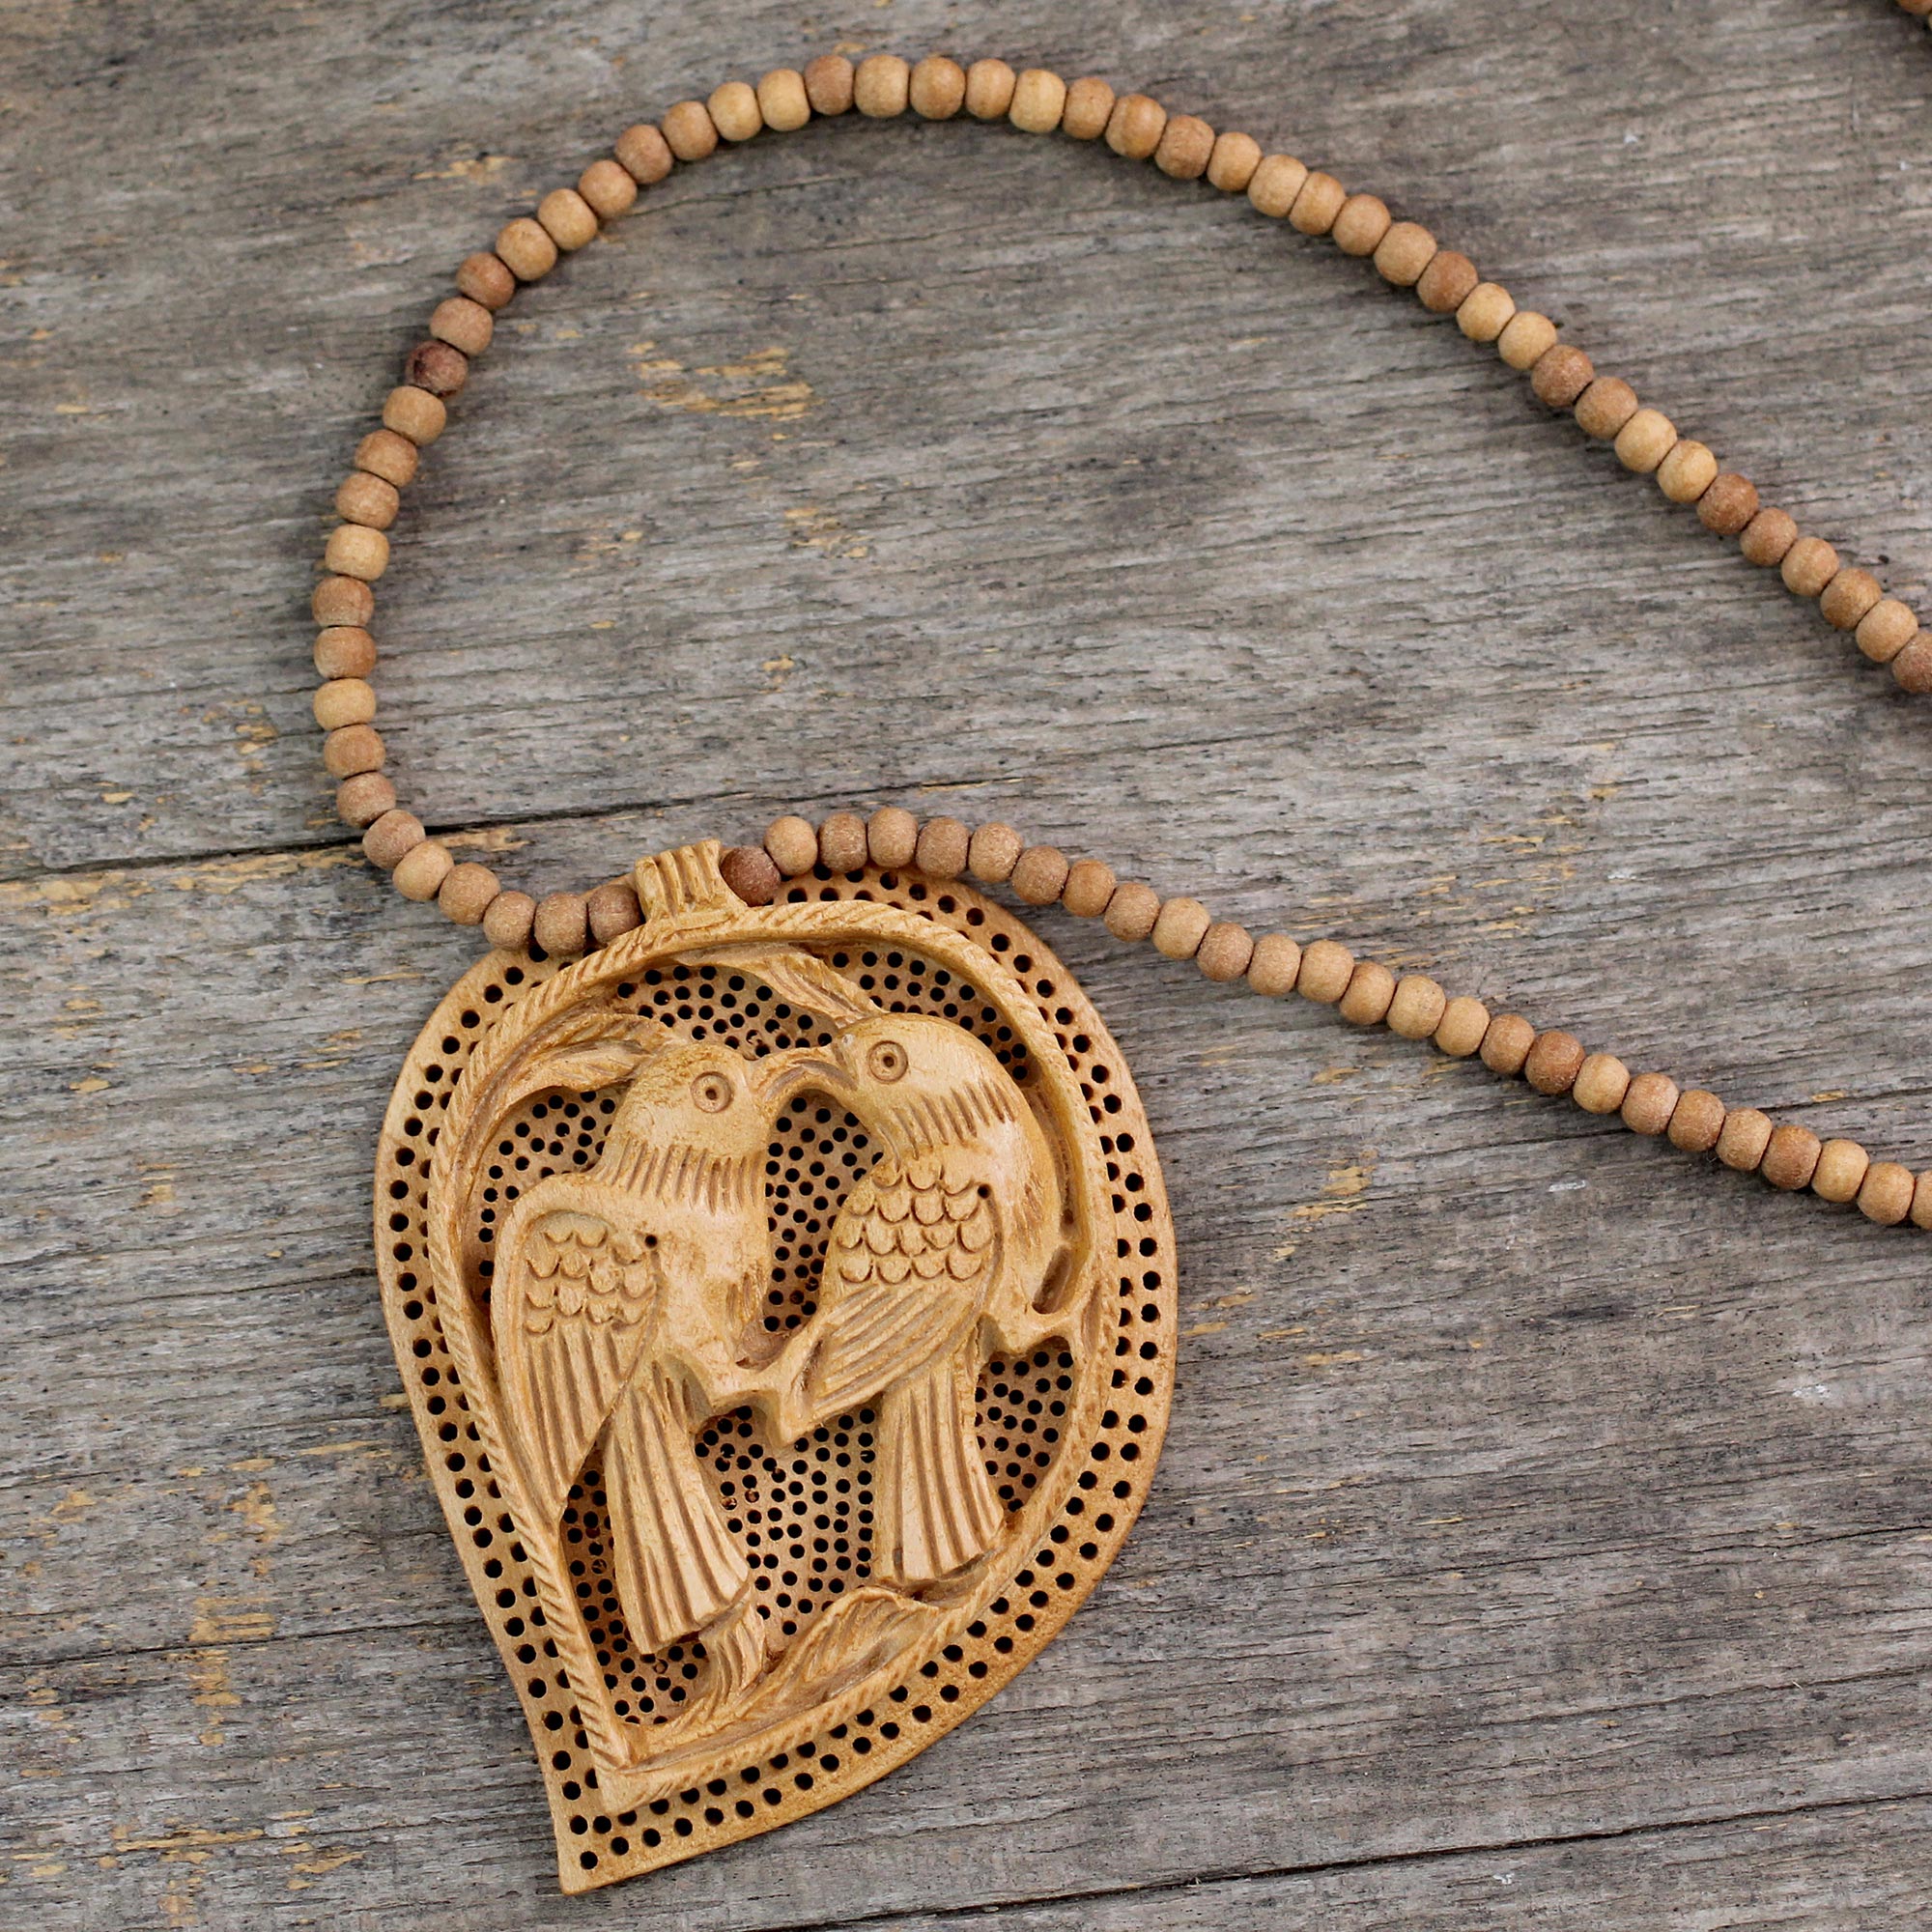 Lovebirds - Hand Carved Wood Necklace from India Jewelry Collection ...